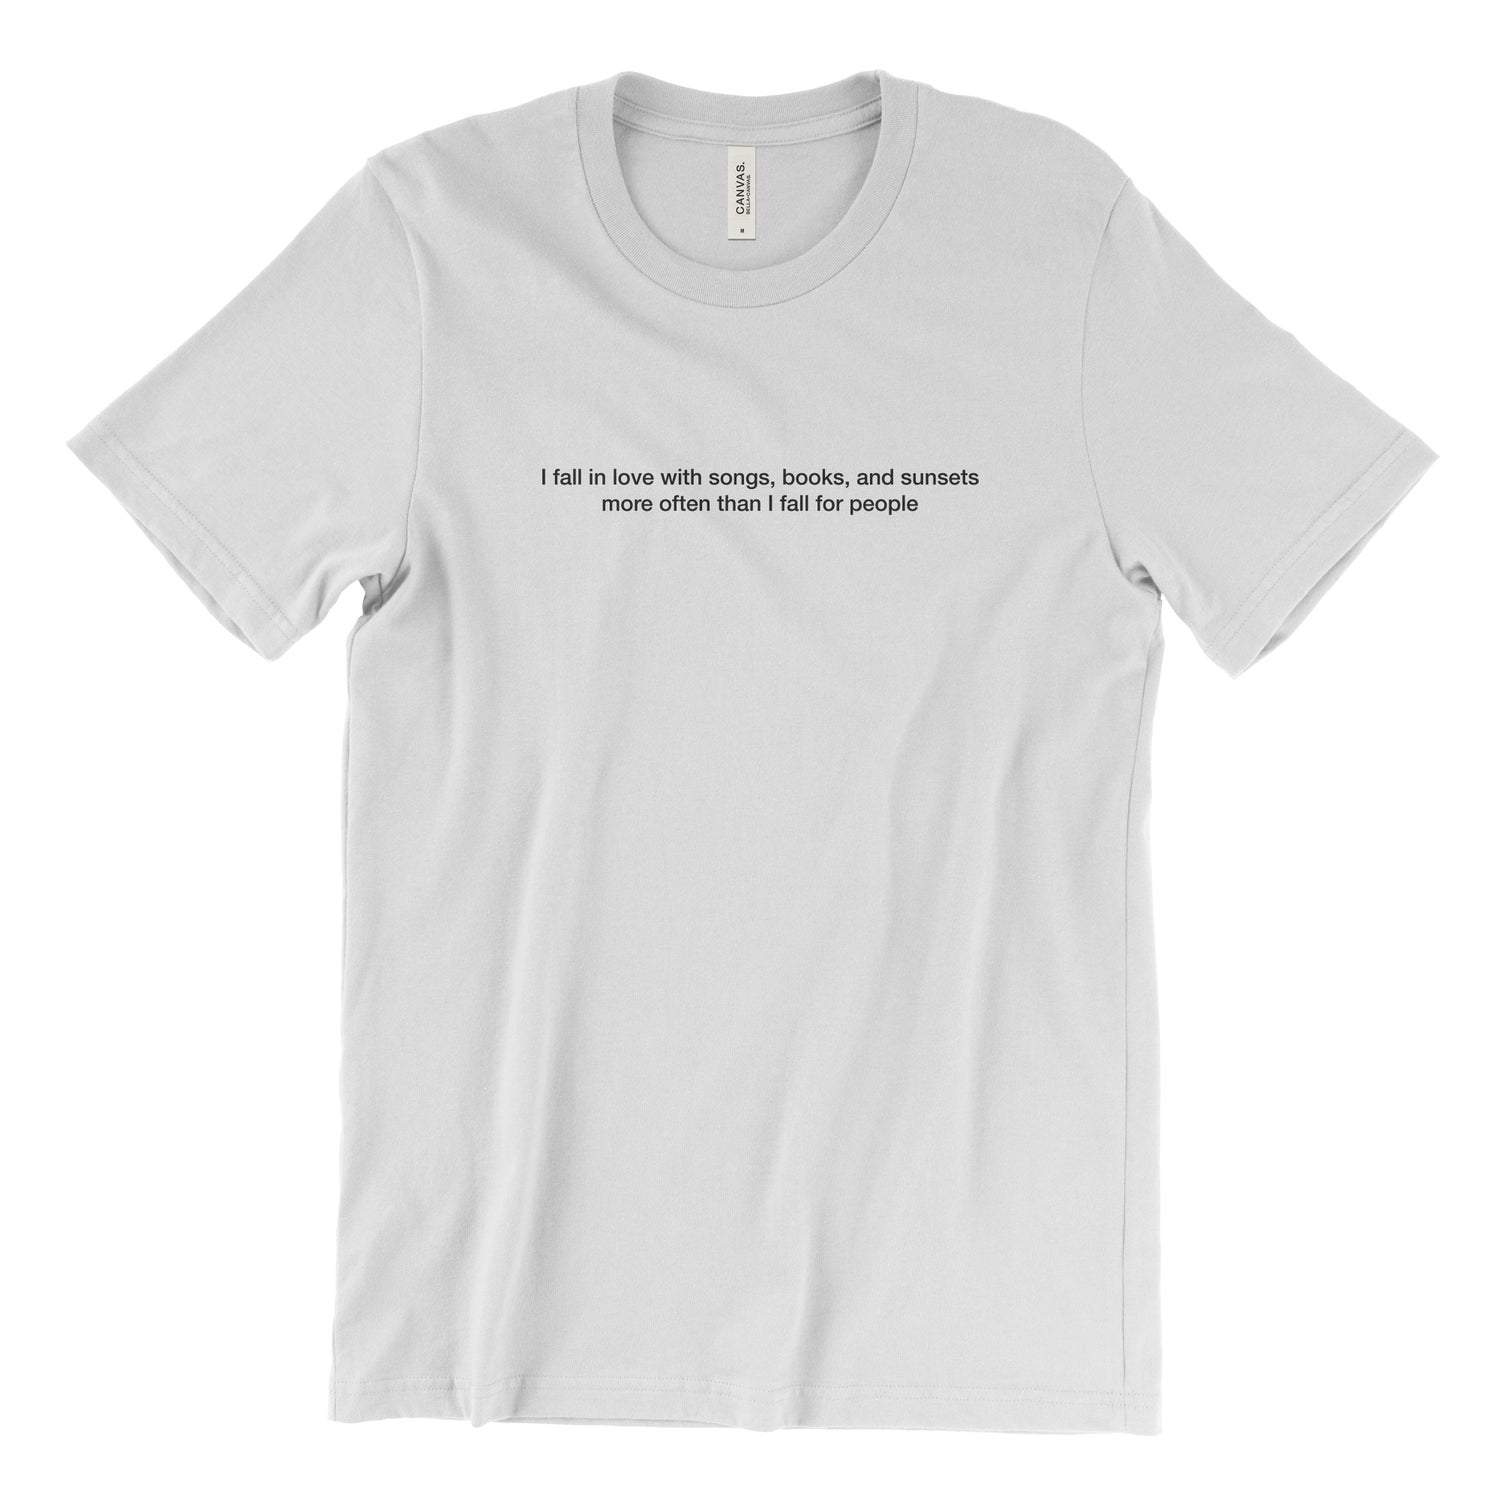 I fall in love with songs, books and sunsets more often than I fall for people T-Shirt (white) - YDWYA – You Decide Who You Are